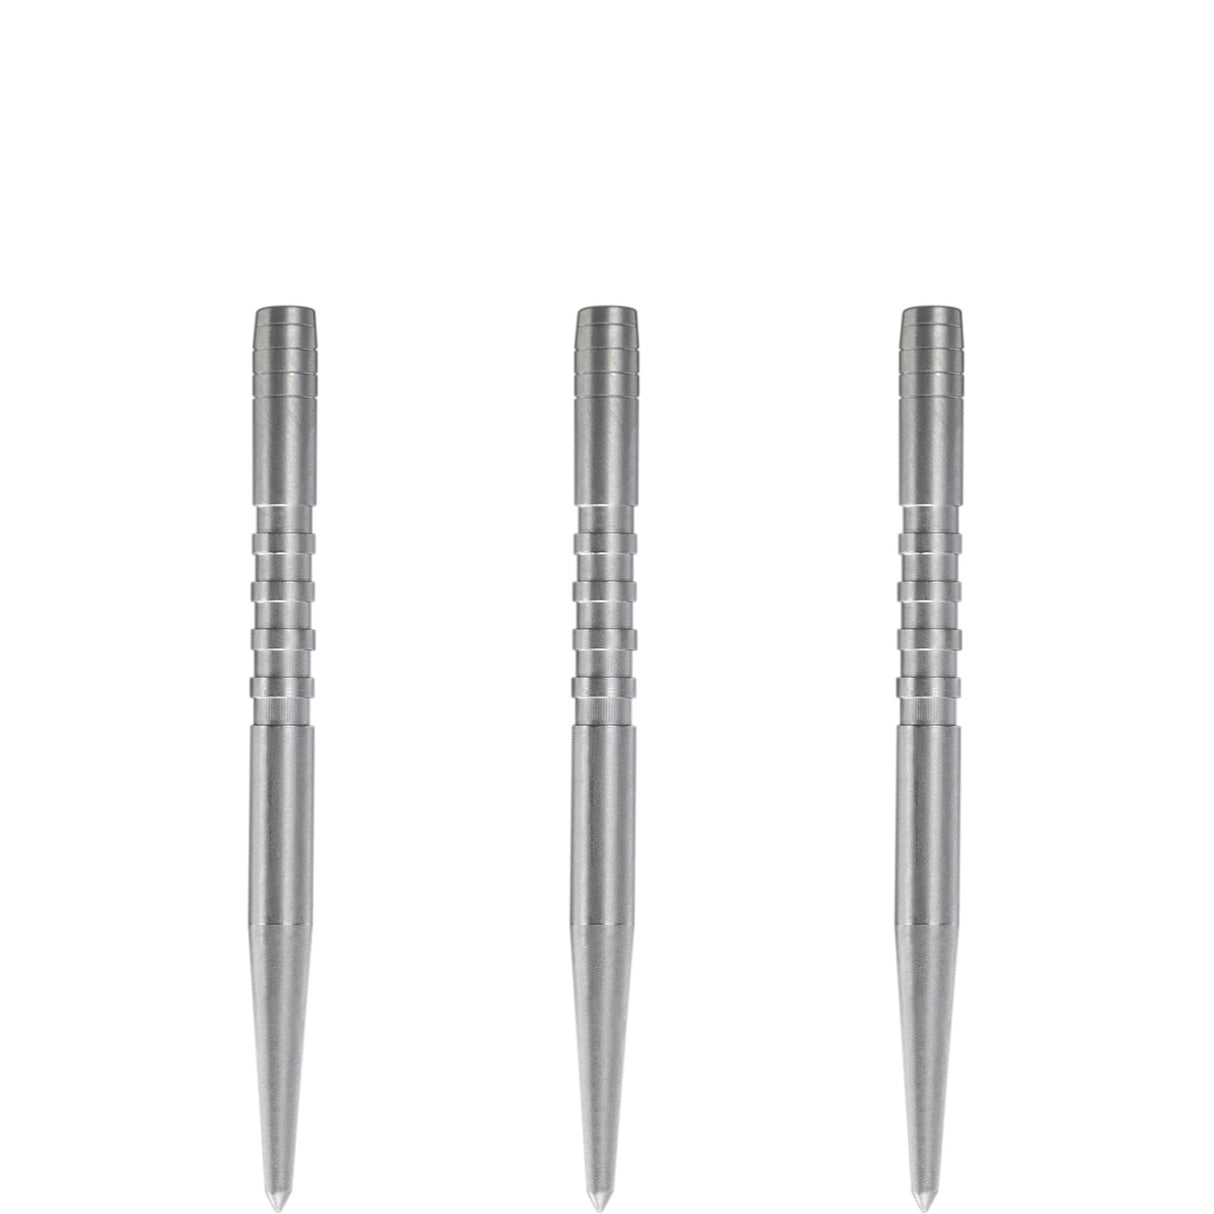 Condor Beak Dart Points - Steel Tip Replacement Points - with Cut - 5 Ring - Silver